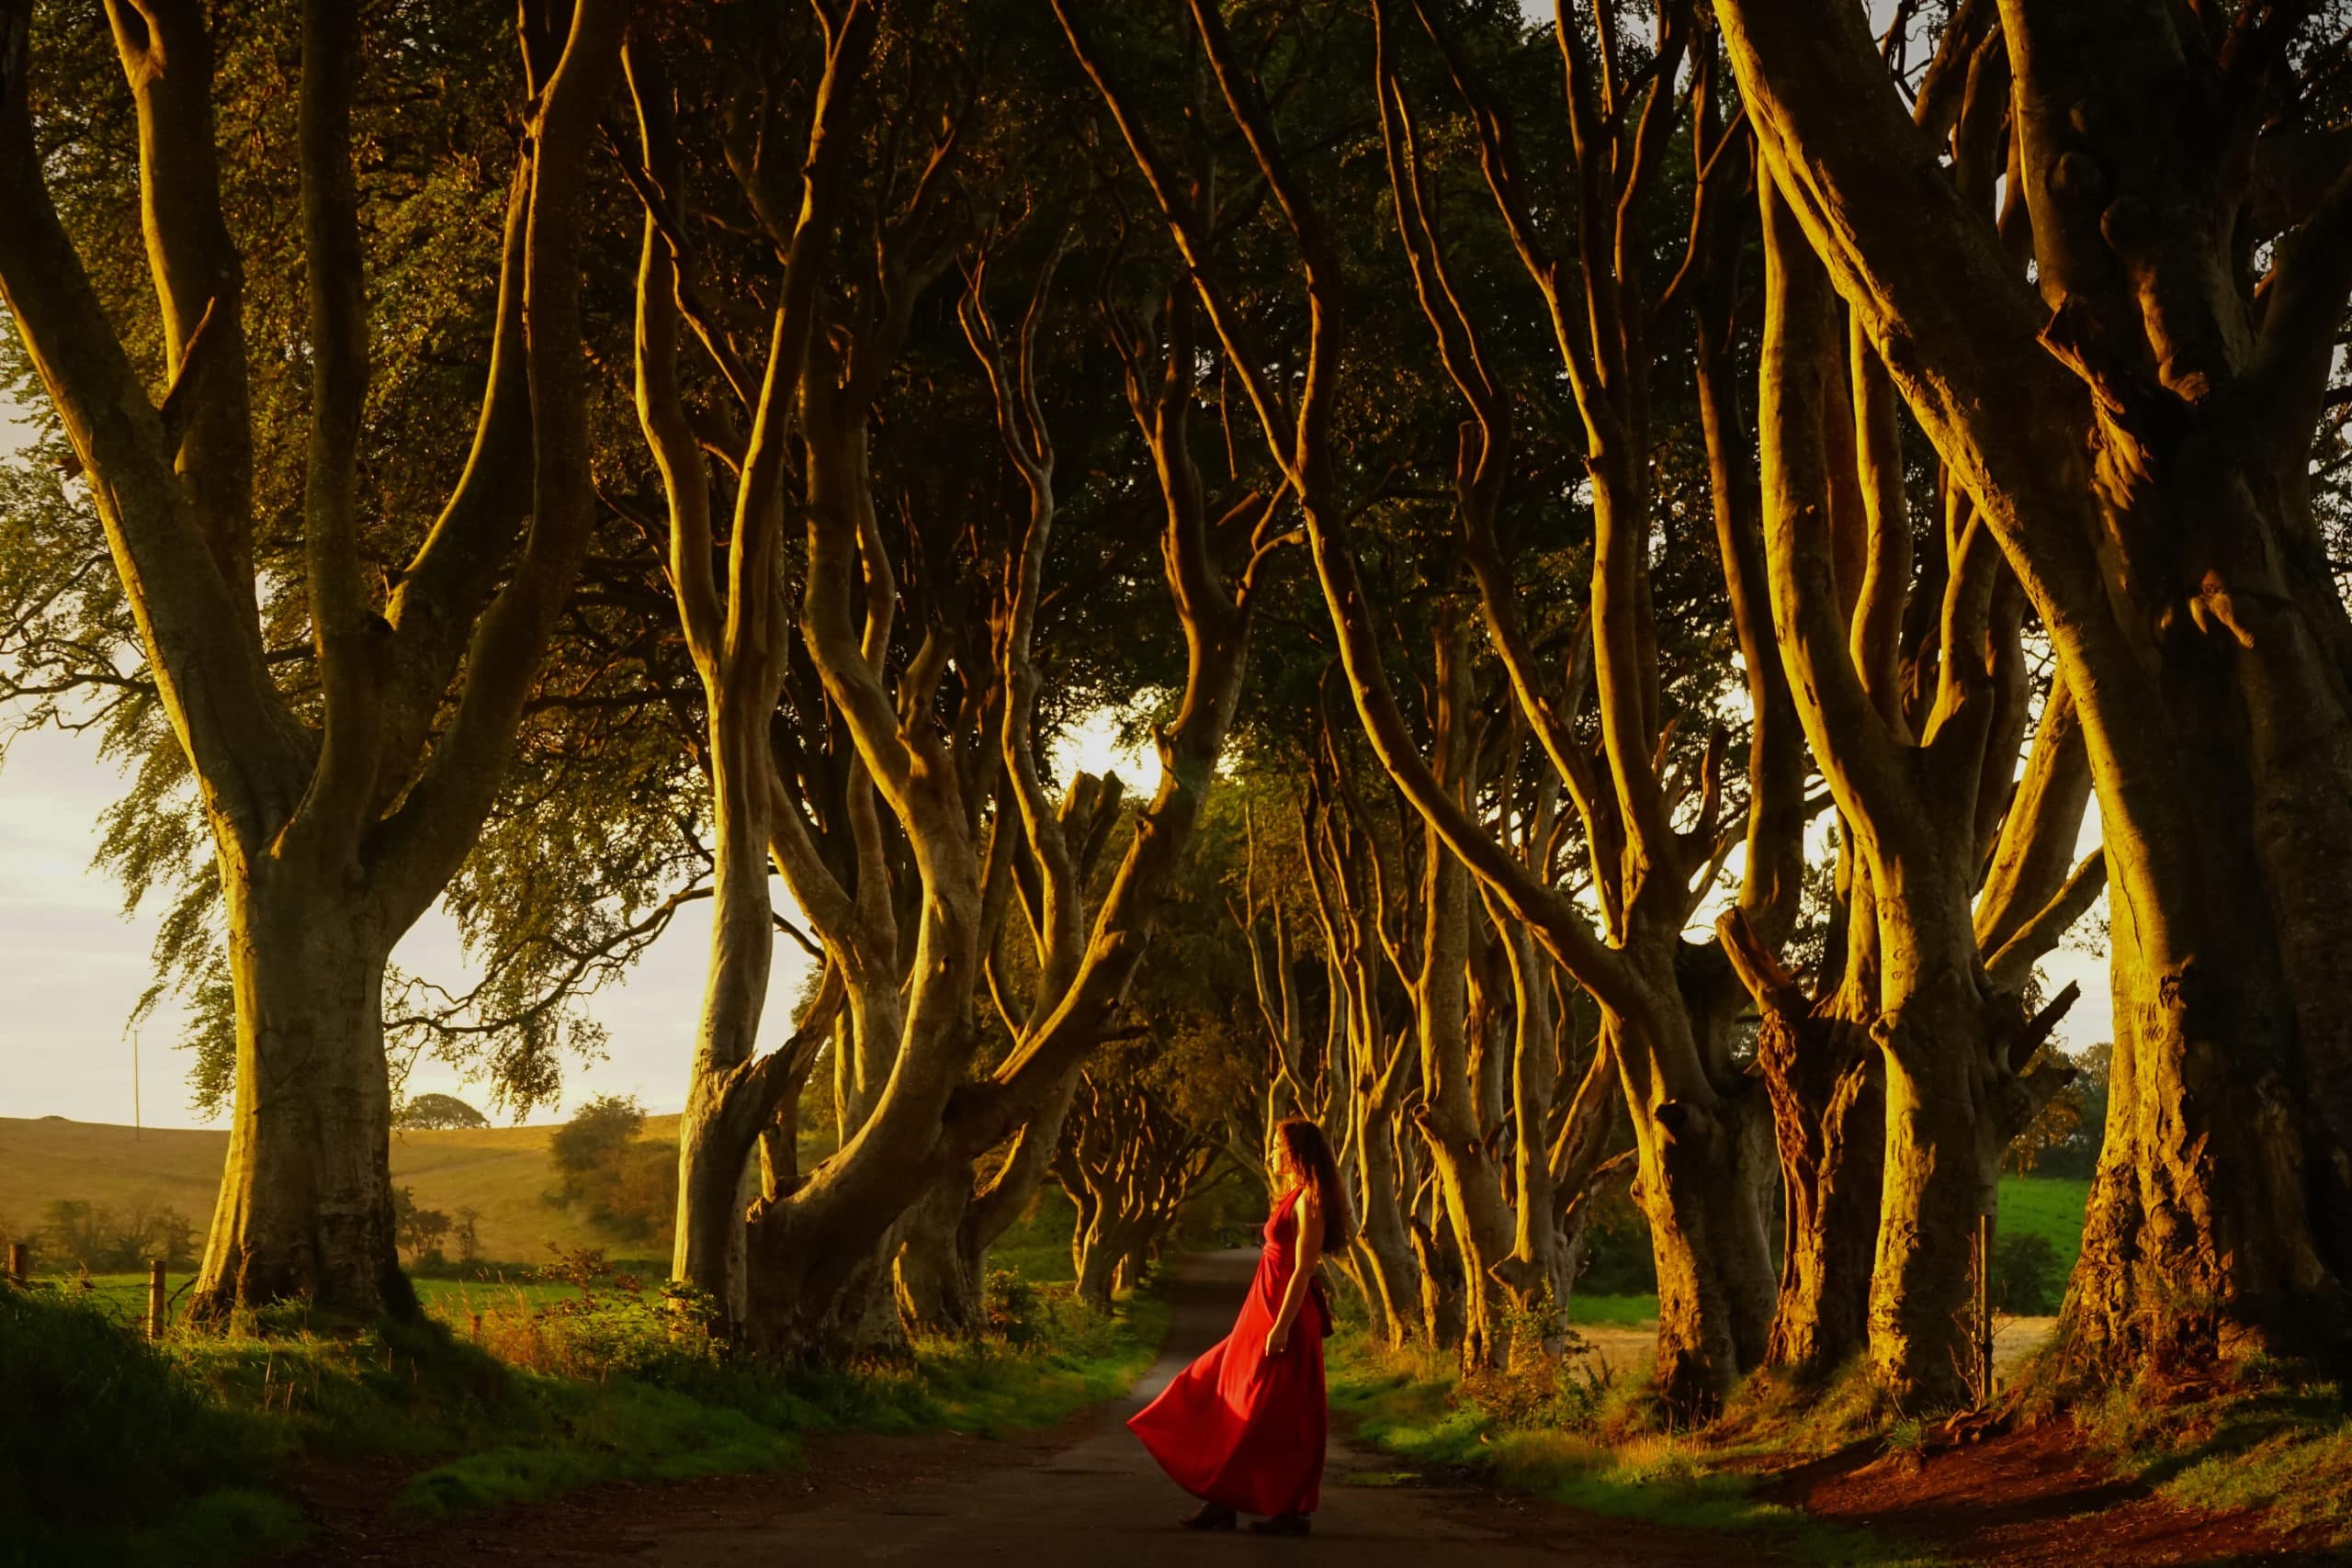 Magical morning light, trees, over enchanting woman with wavy hairs in red dress.